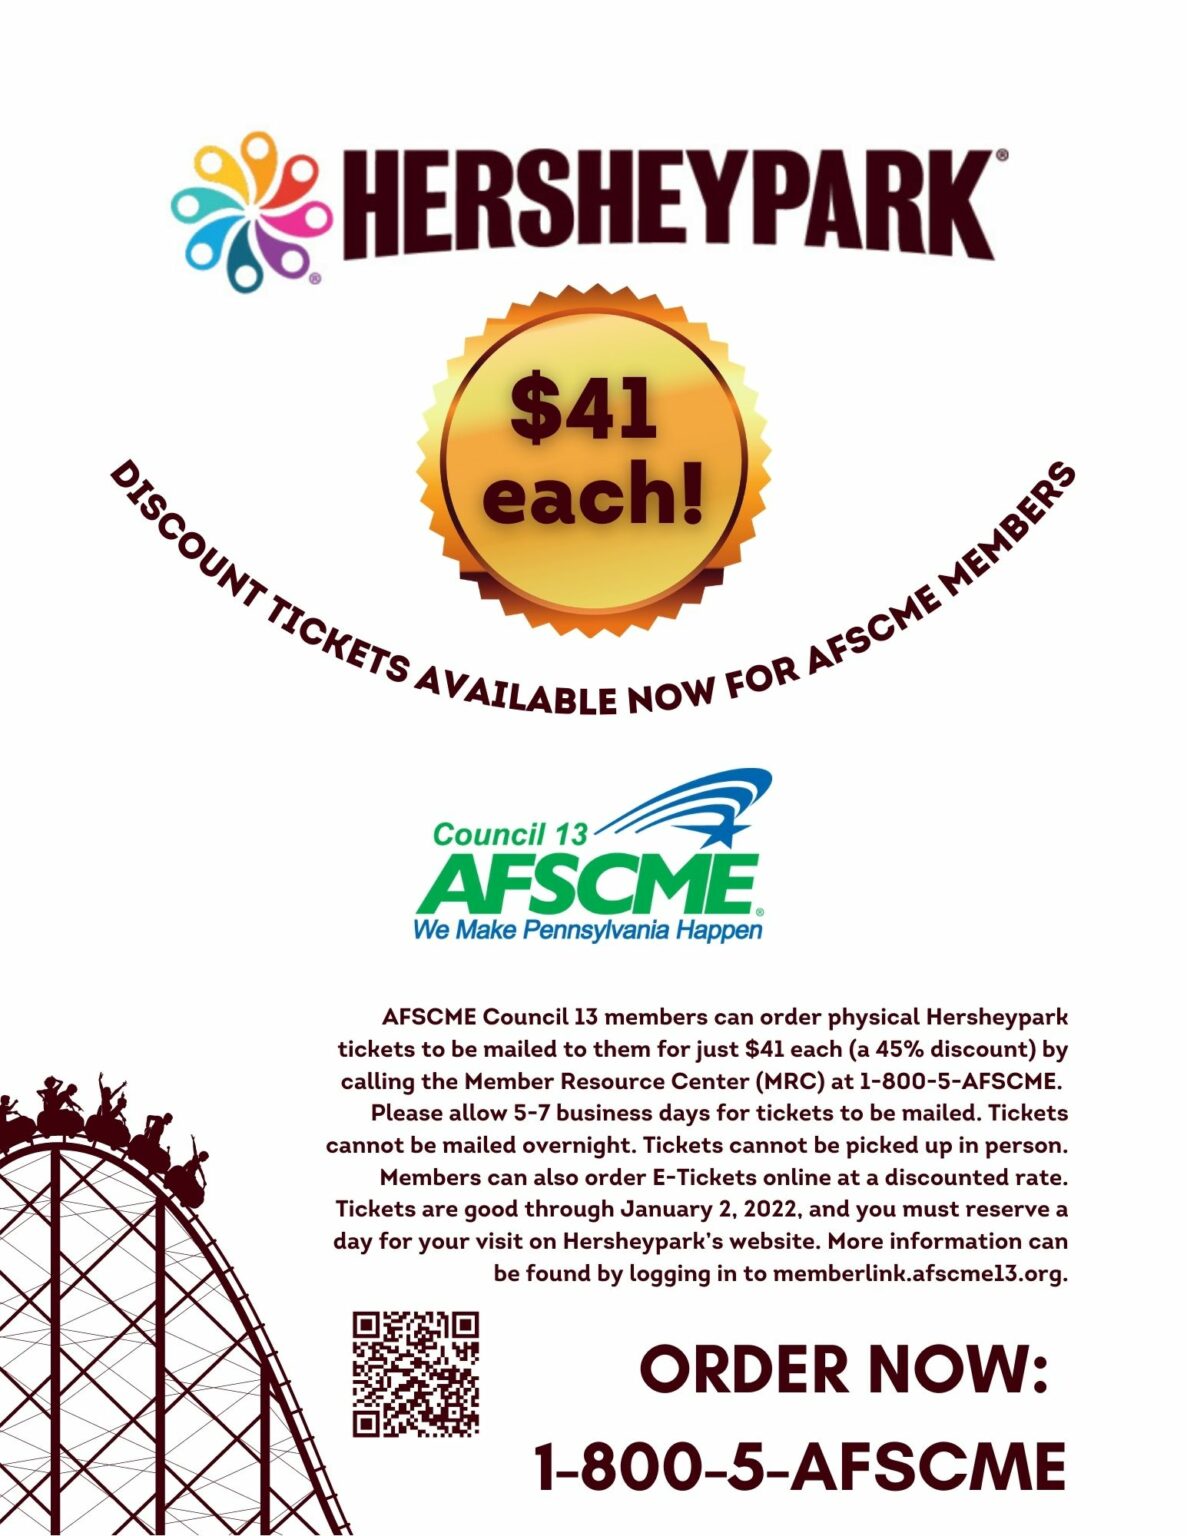 Discount Hersheypark tickets available now for Council 13 members